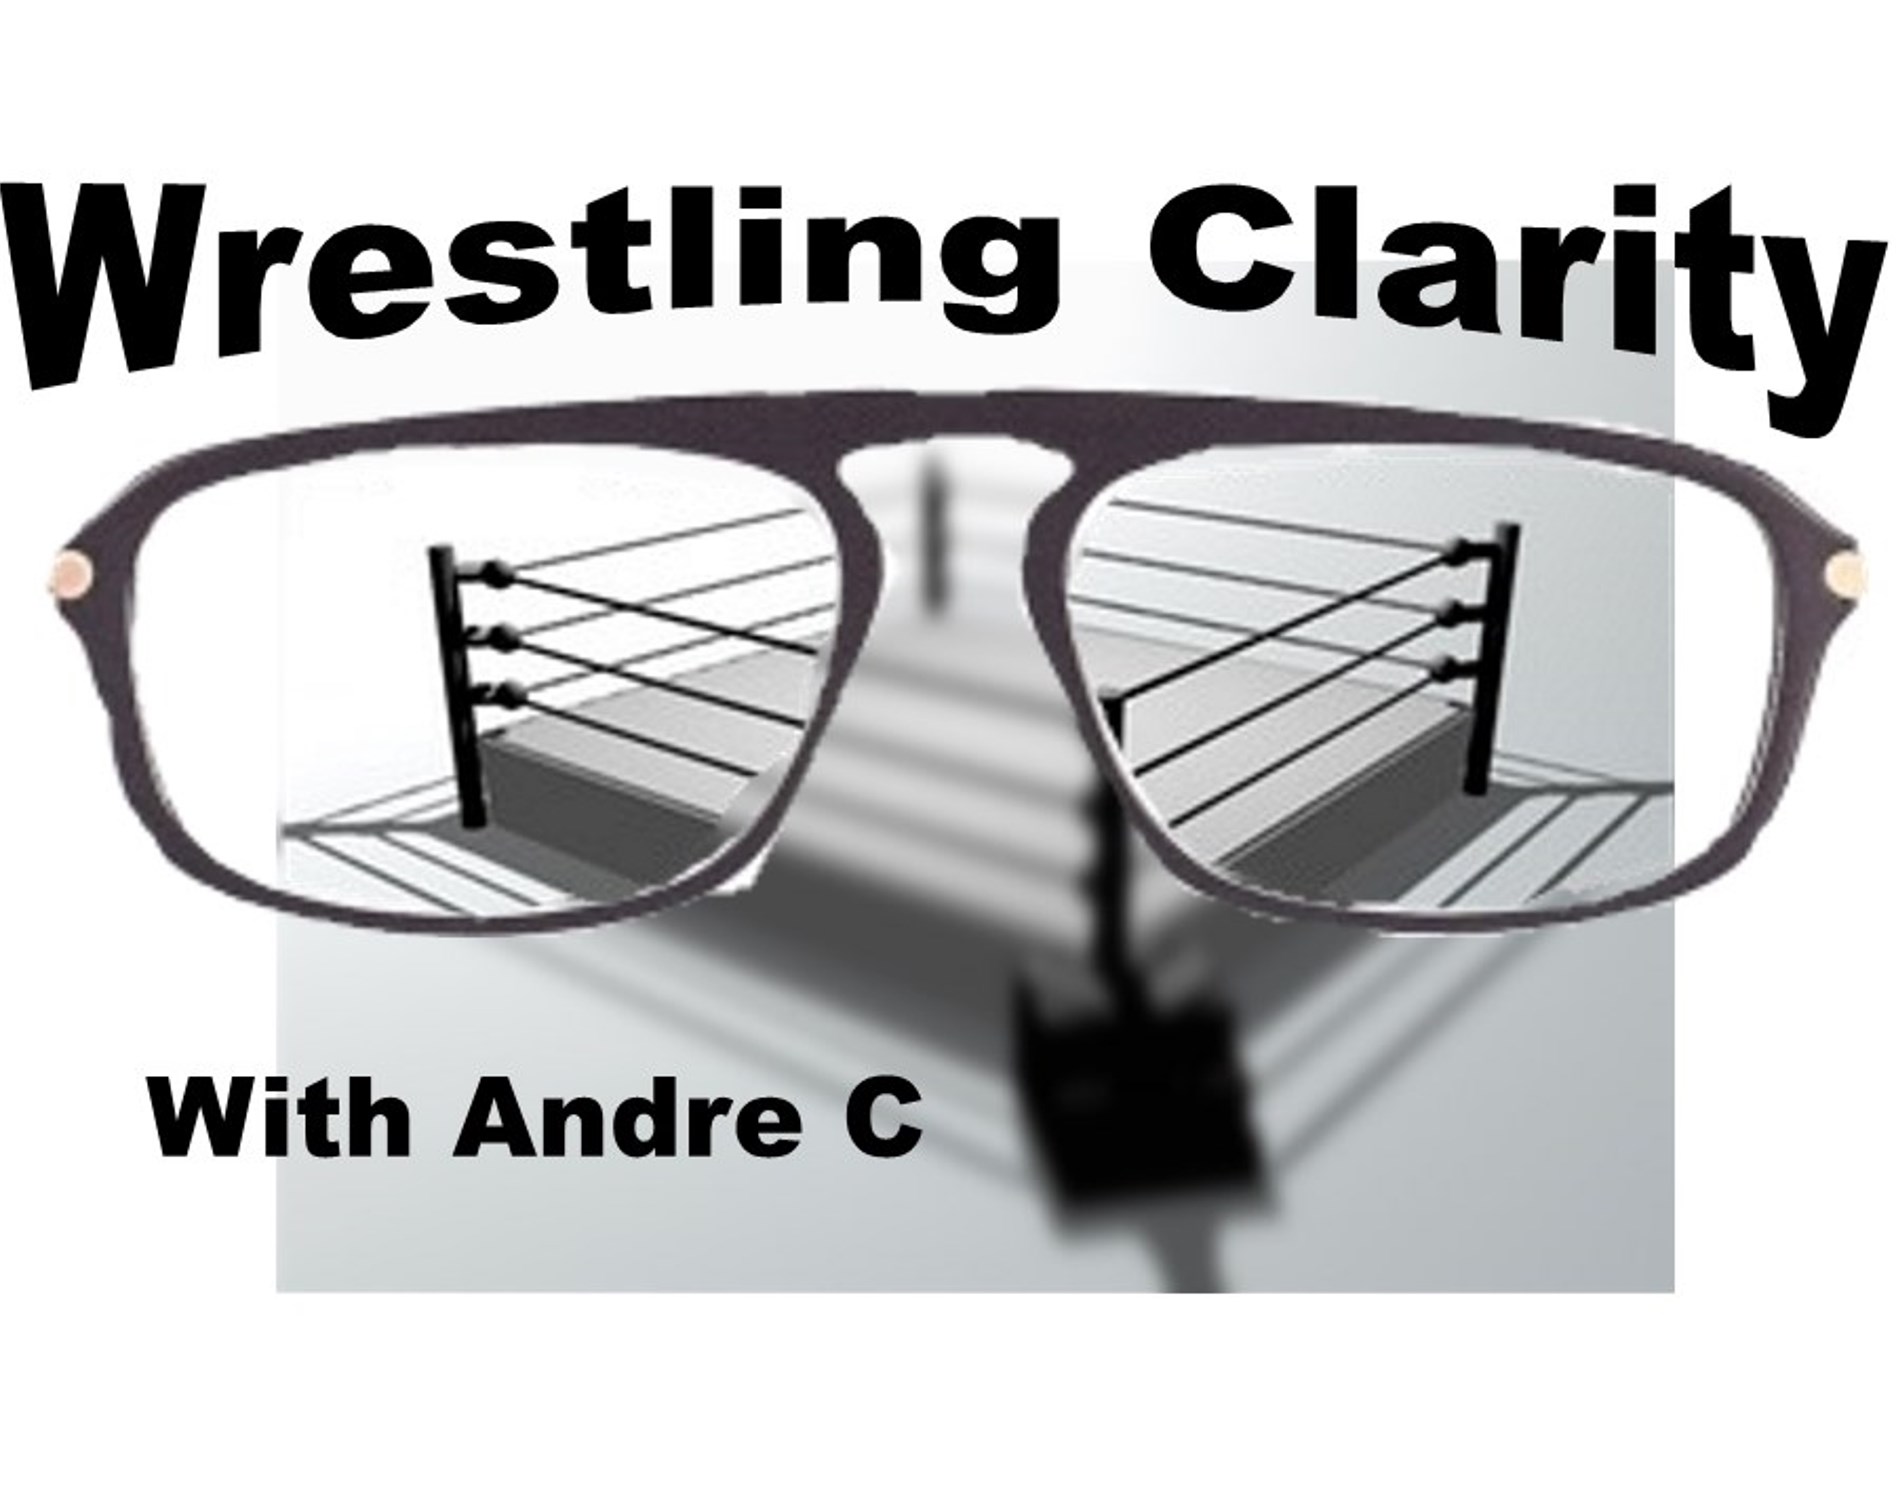 Wrestling Clarity - The Chris Perish Interview (Episode Four)